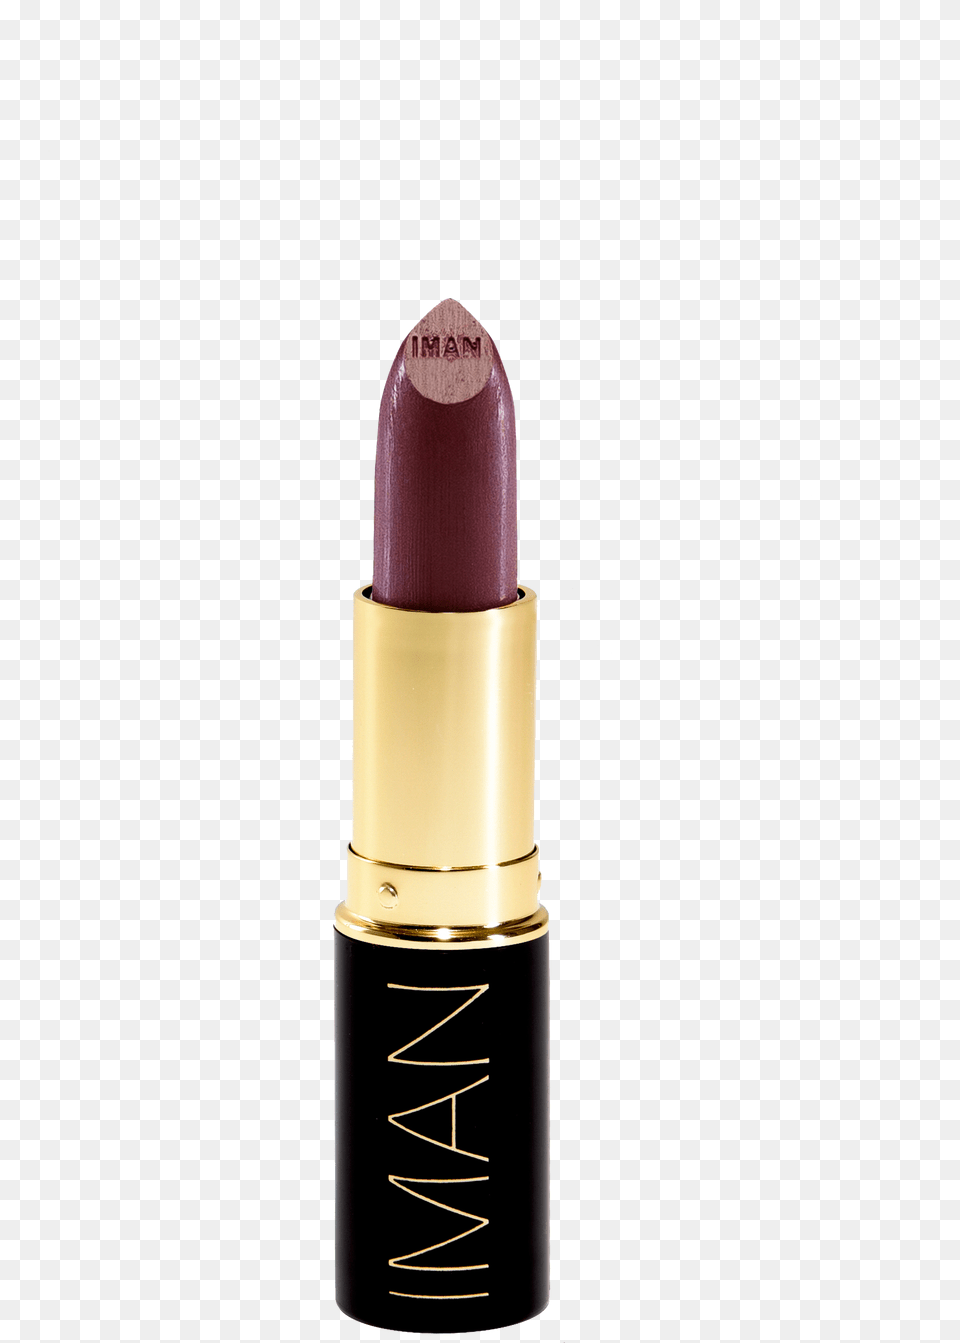 Sultry Iman Lip Stain, Cosmetics, Lipstick Free Png Download